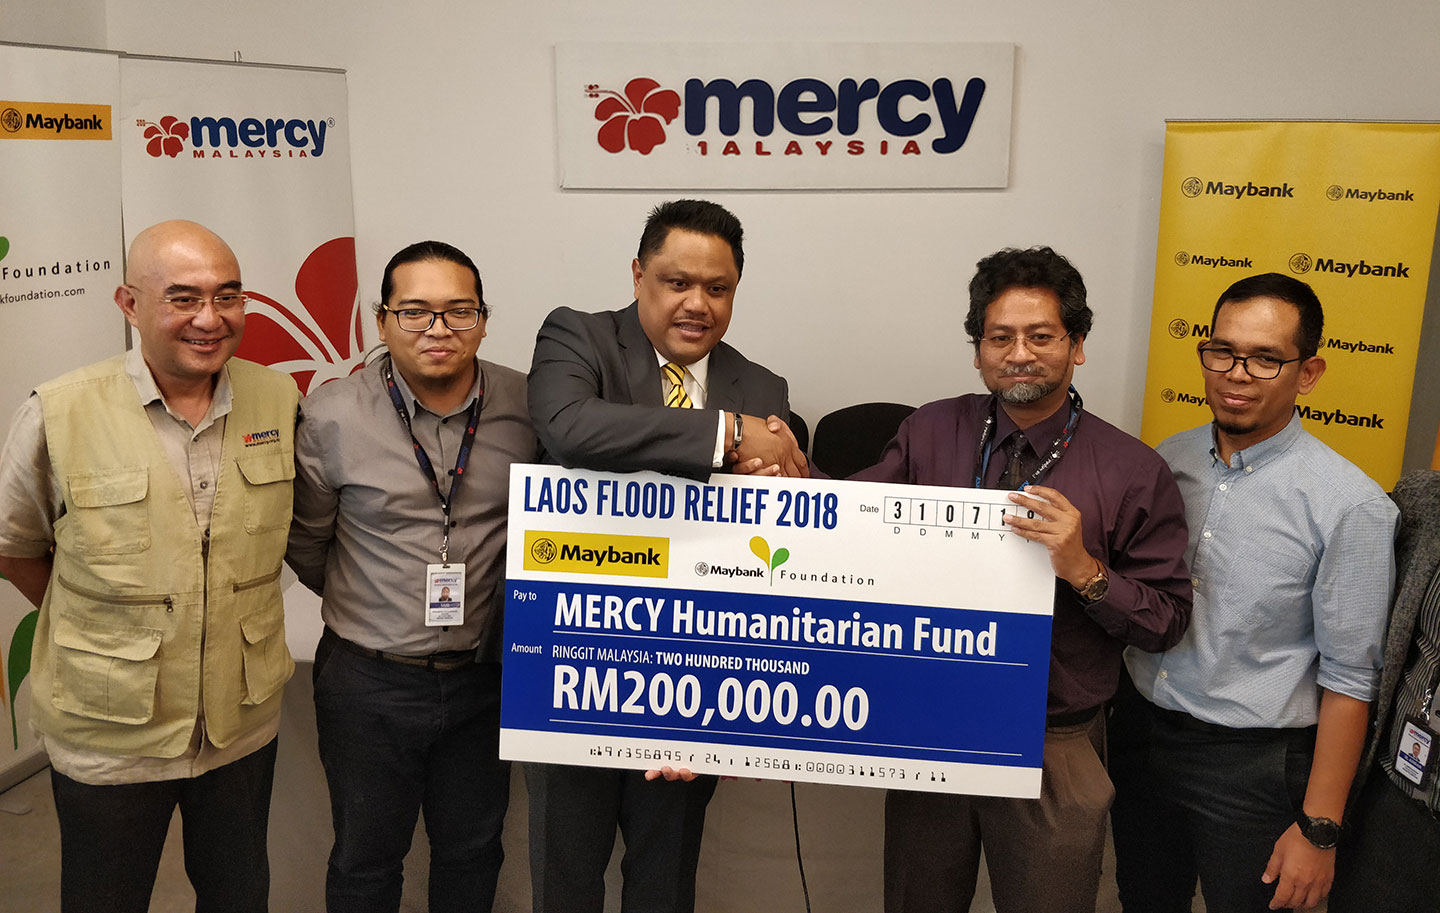 Maybank Donates RM 200,000 to Laos Flood Relief